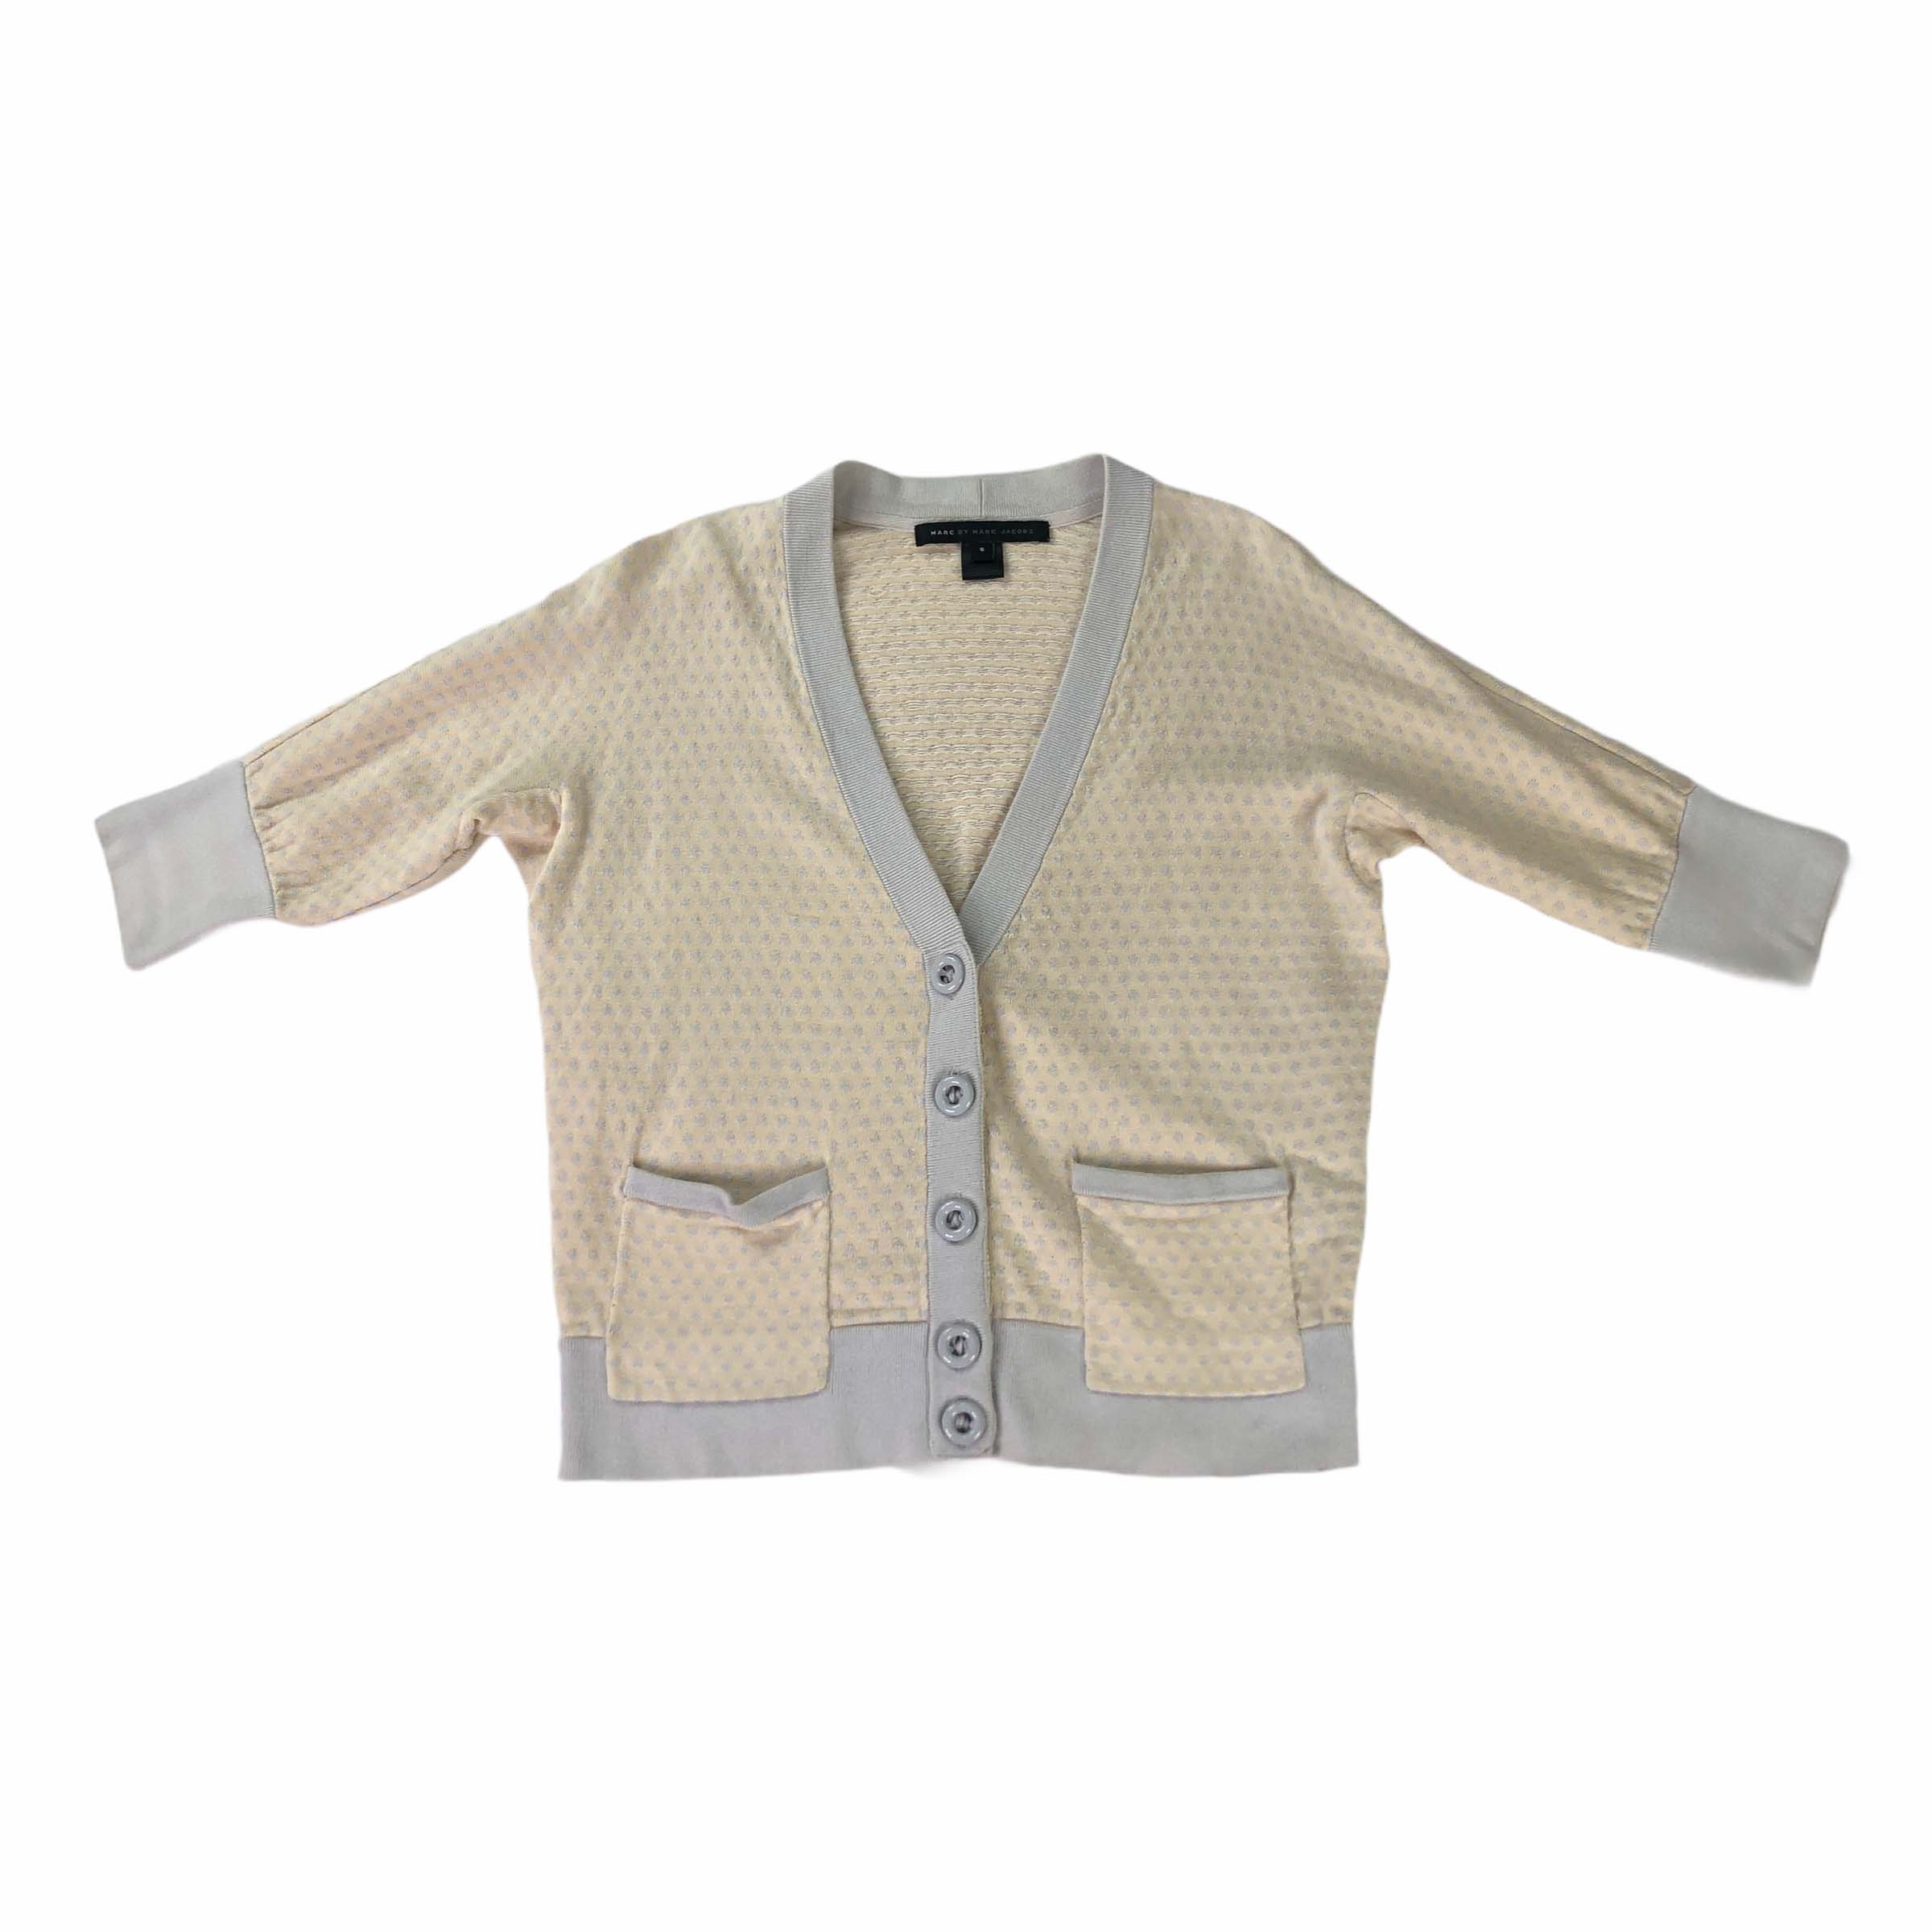 [Marc by Marc Jacobs] Cardigan - Size S